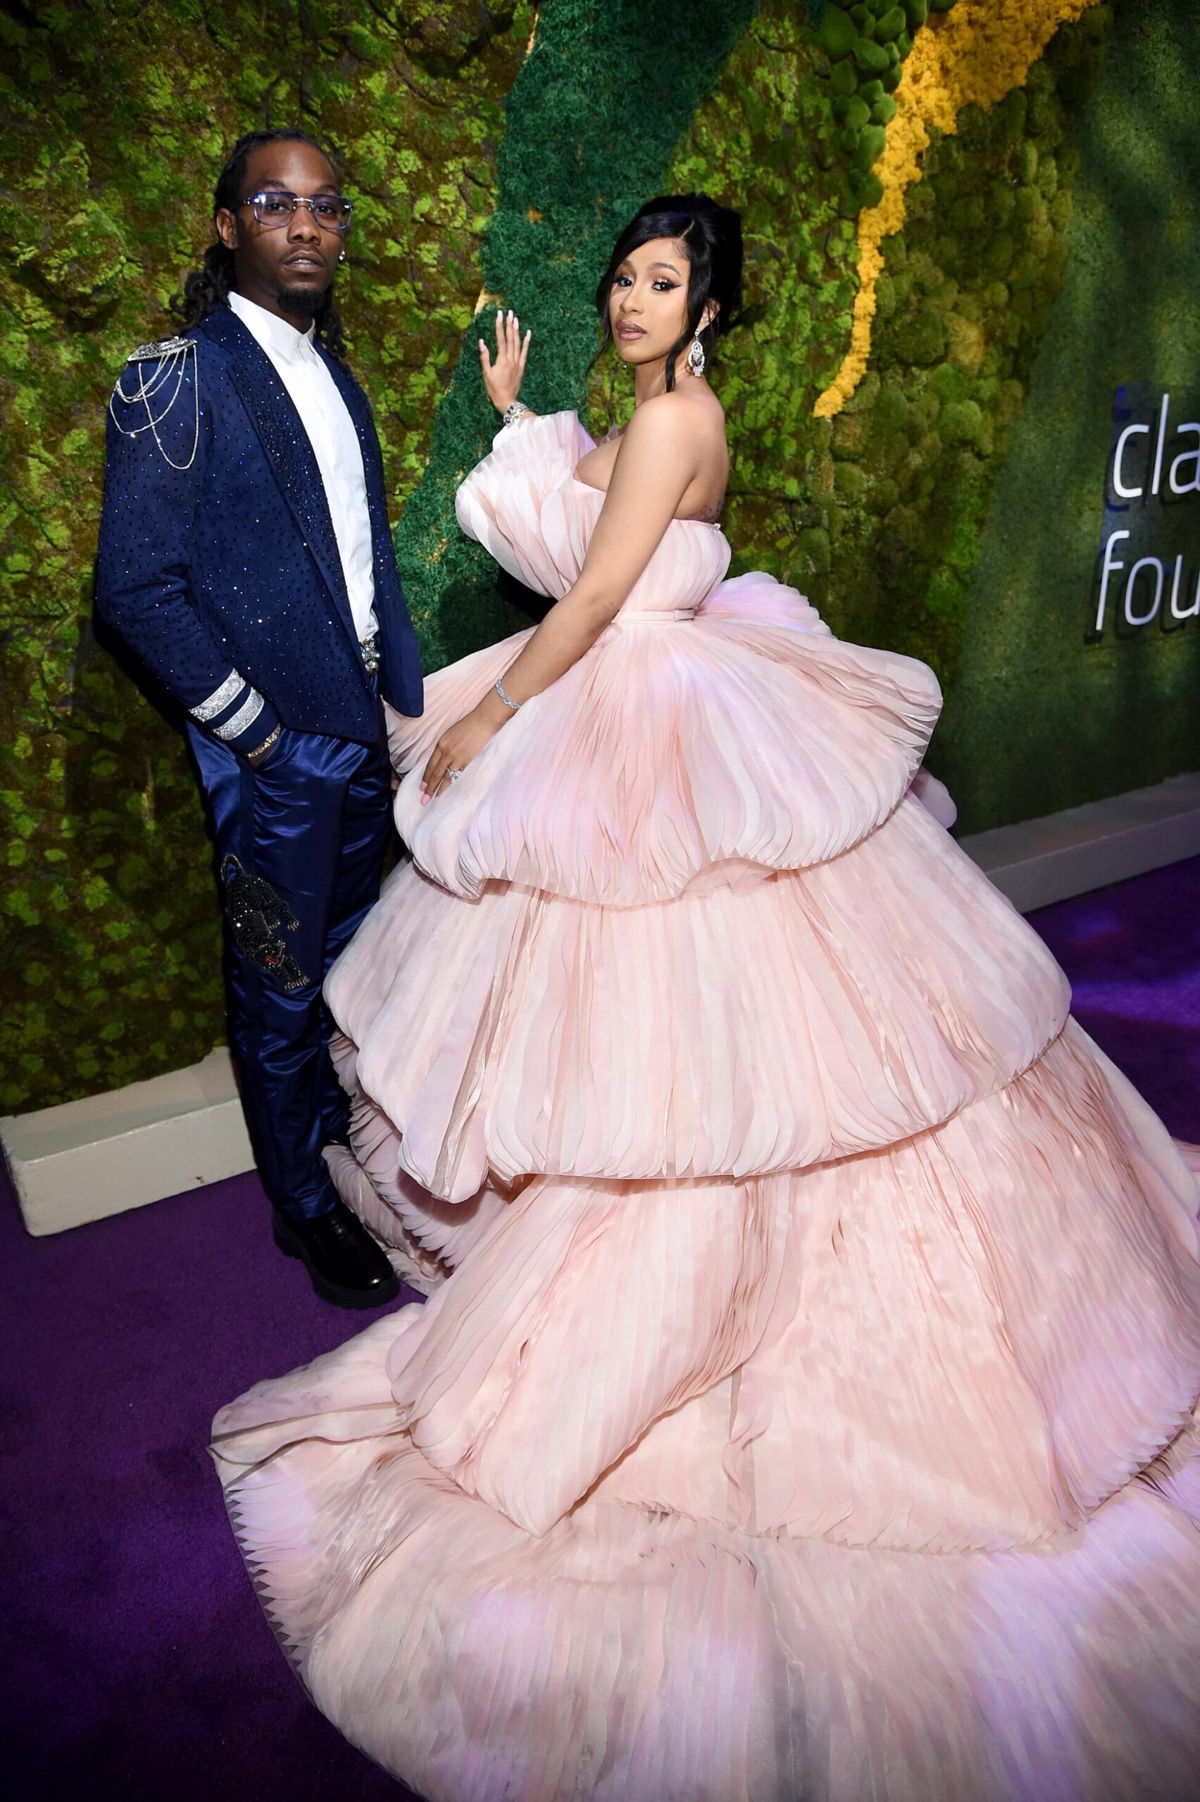 <i>Dimitrios Kambouris/Getty Images North America</i><br/>Rappers Offset (L) and Cardi B